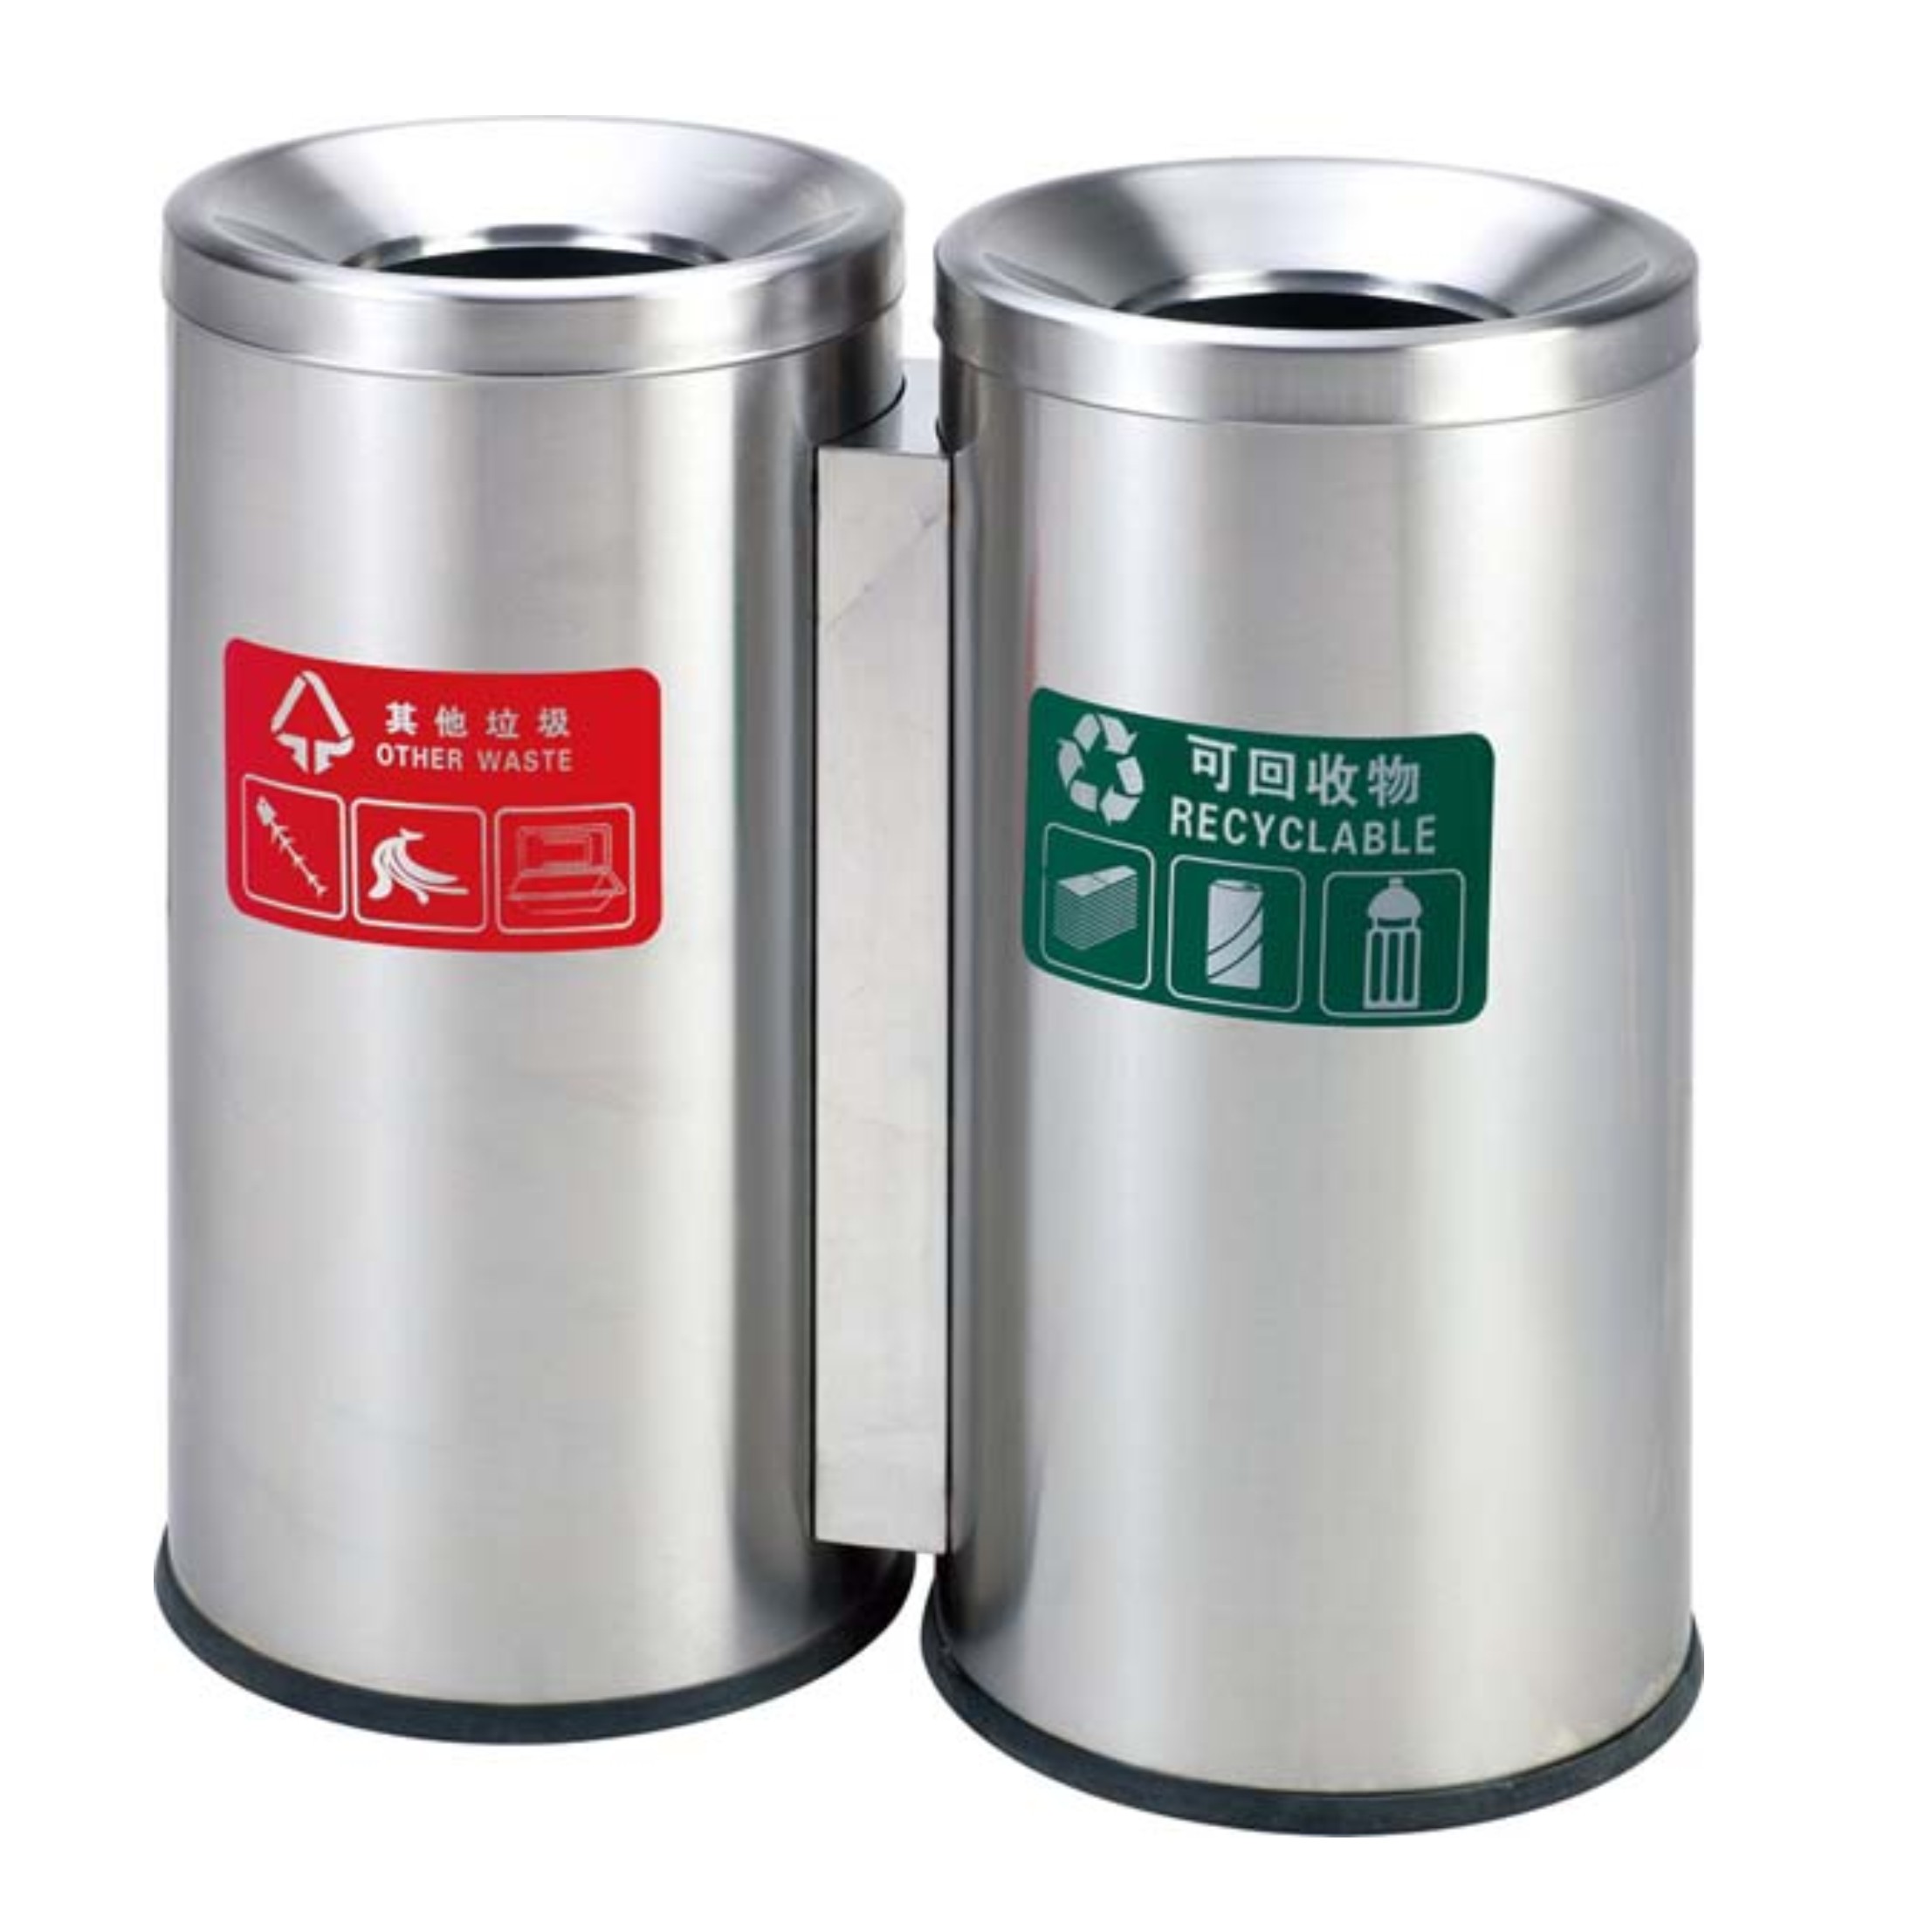 Recyclable Outdoor Waste Can With Stainless Steel HW-92